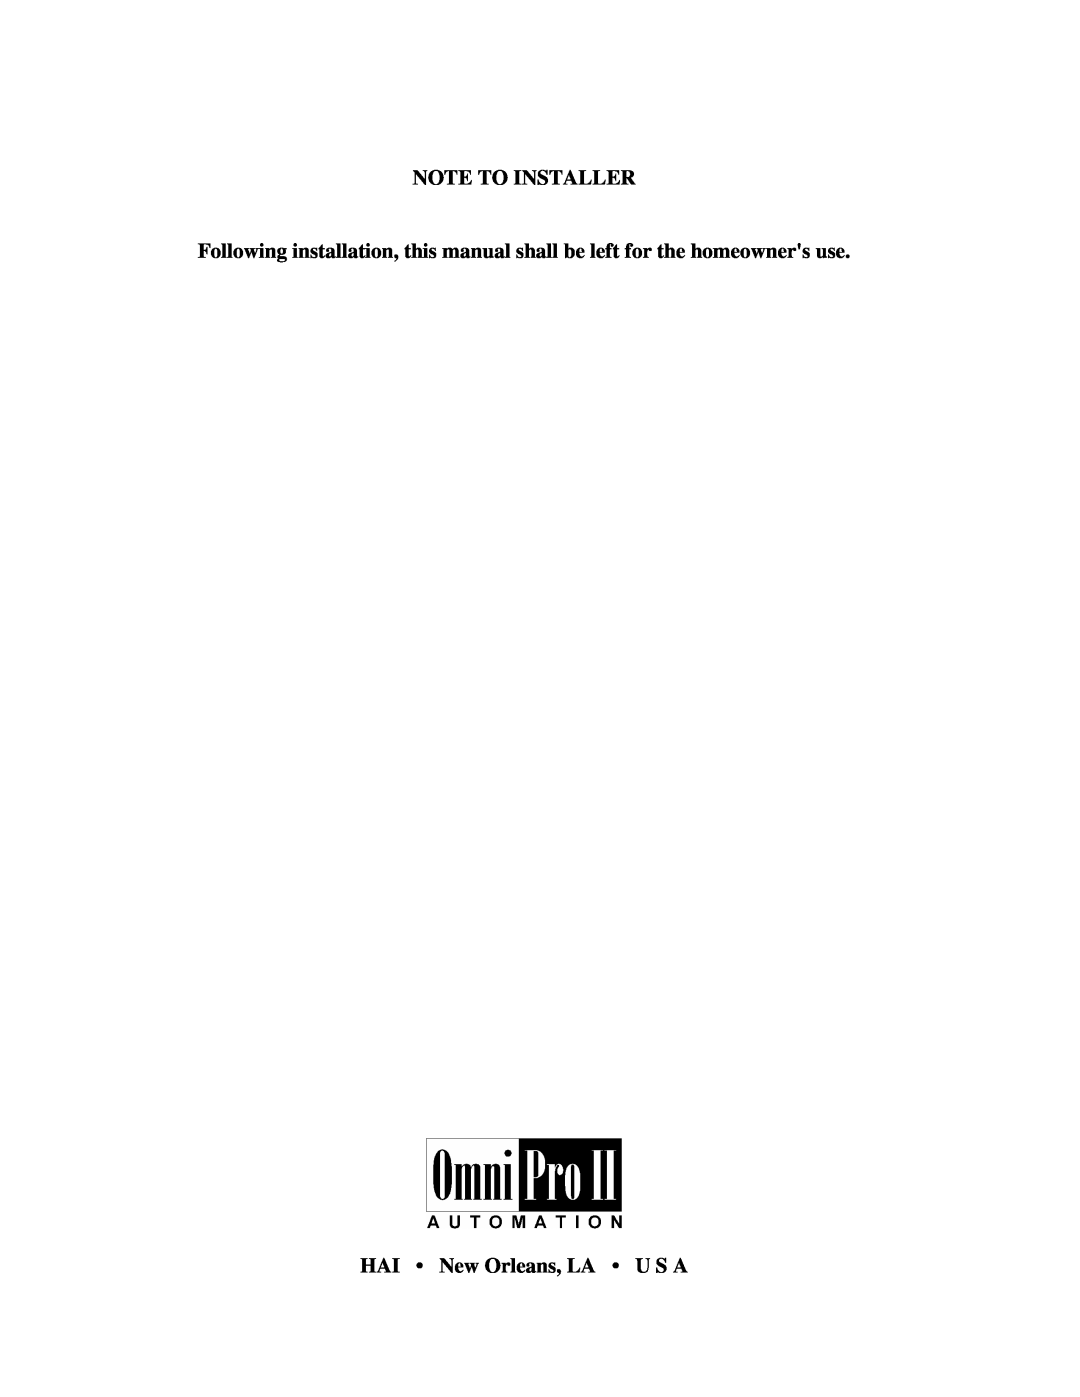 Home Automation OmniPro II owner manual Note To Installer, HAI New Orleans, LA U S A 